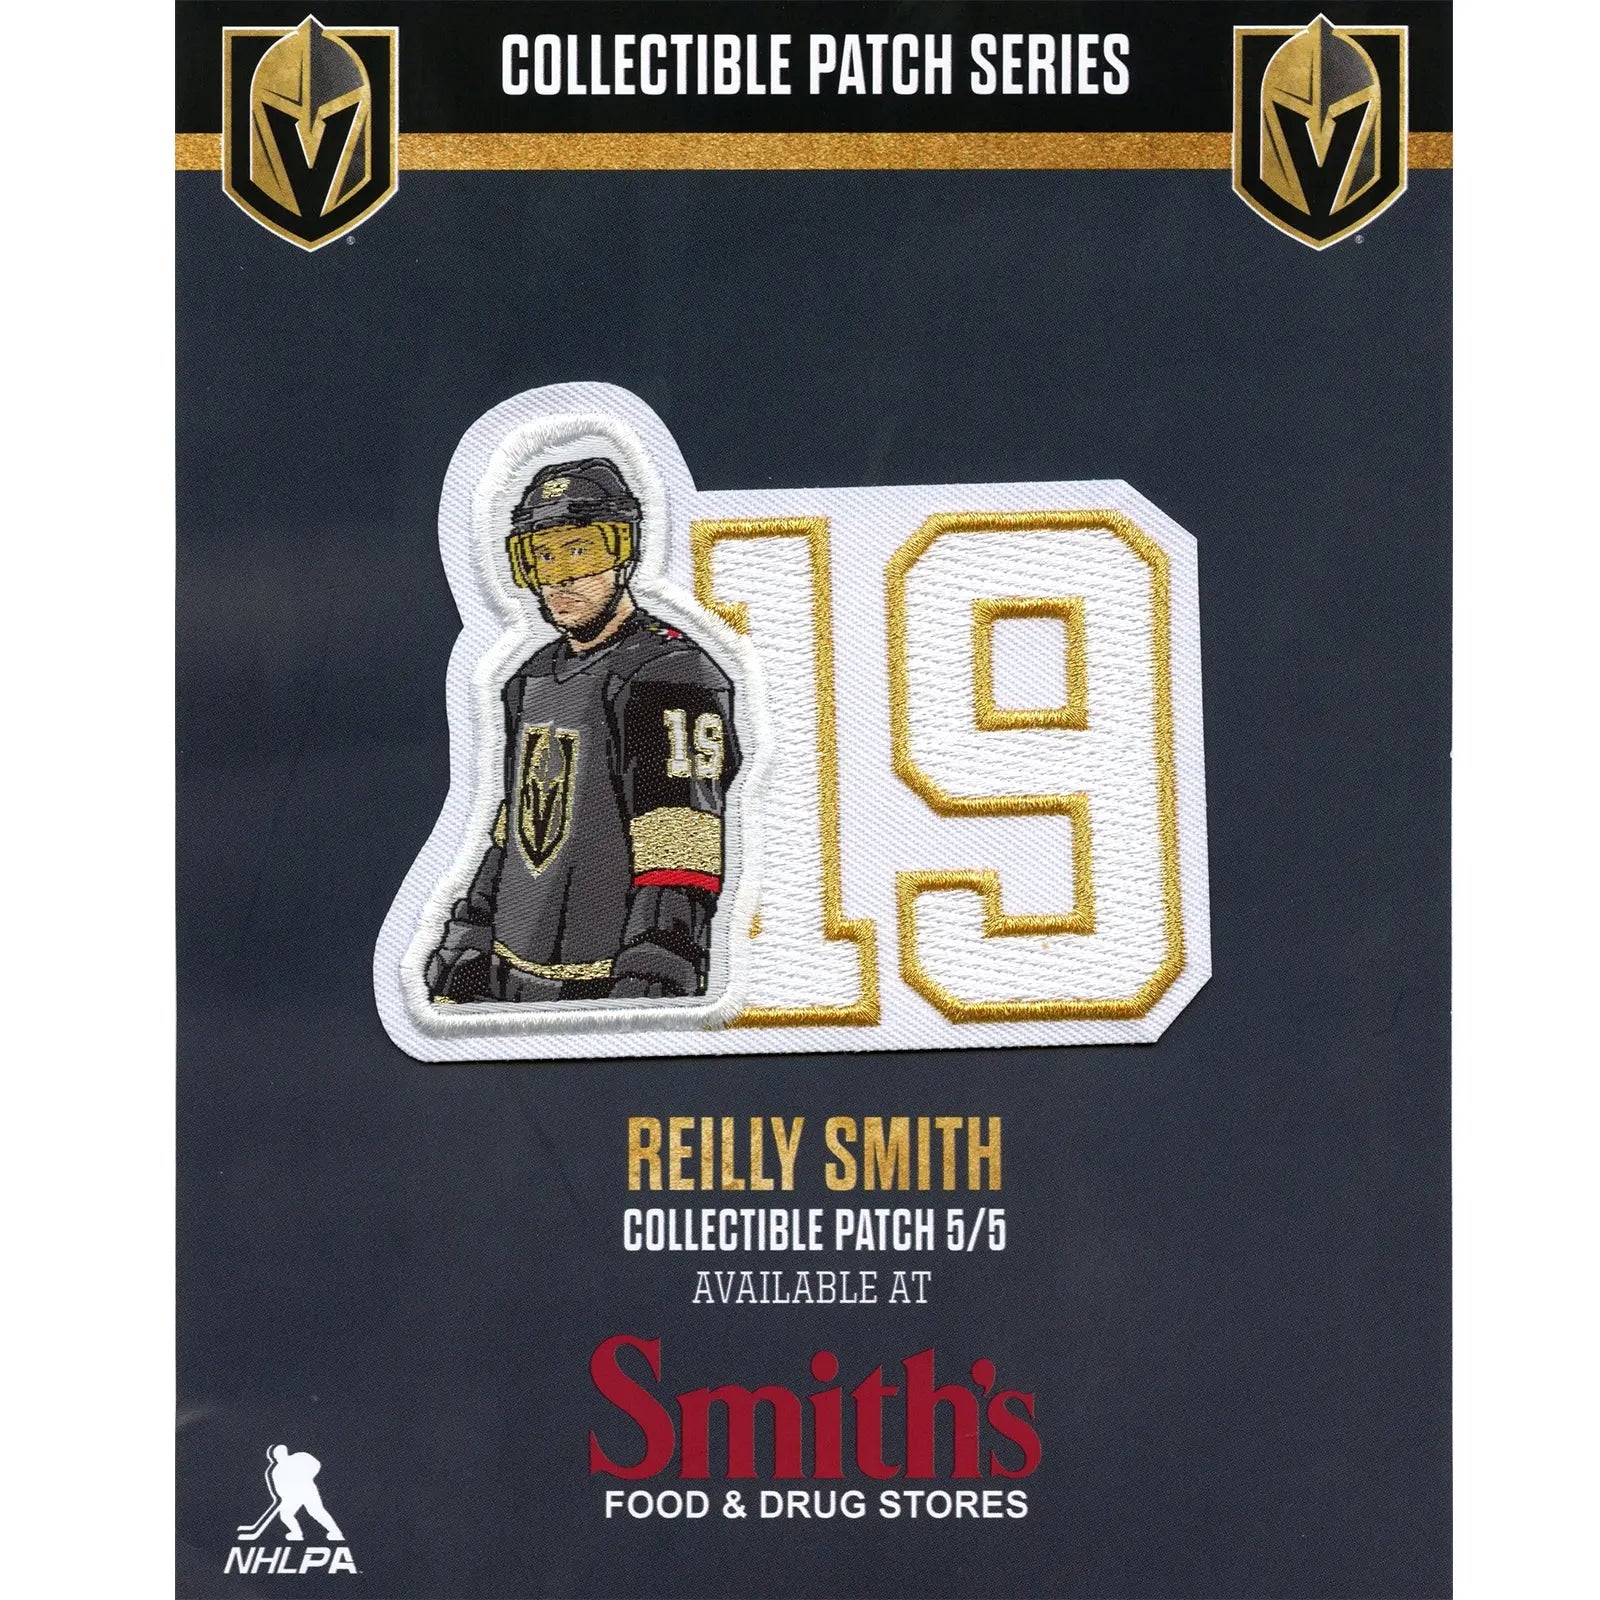 Golden Knights releasing player patches with Smith's, Golden Knights